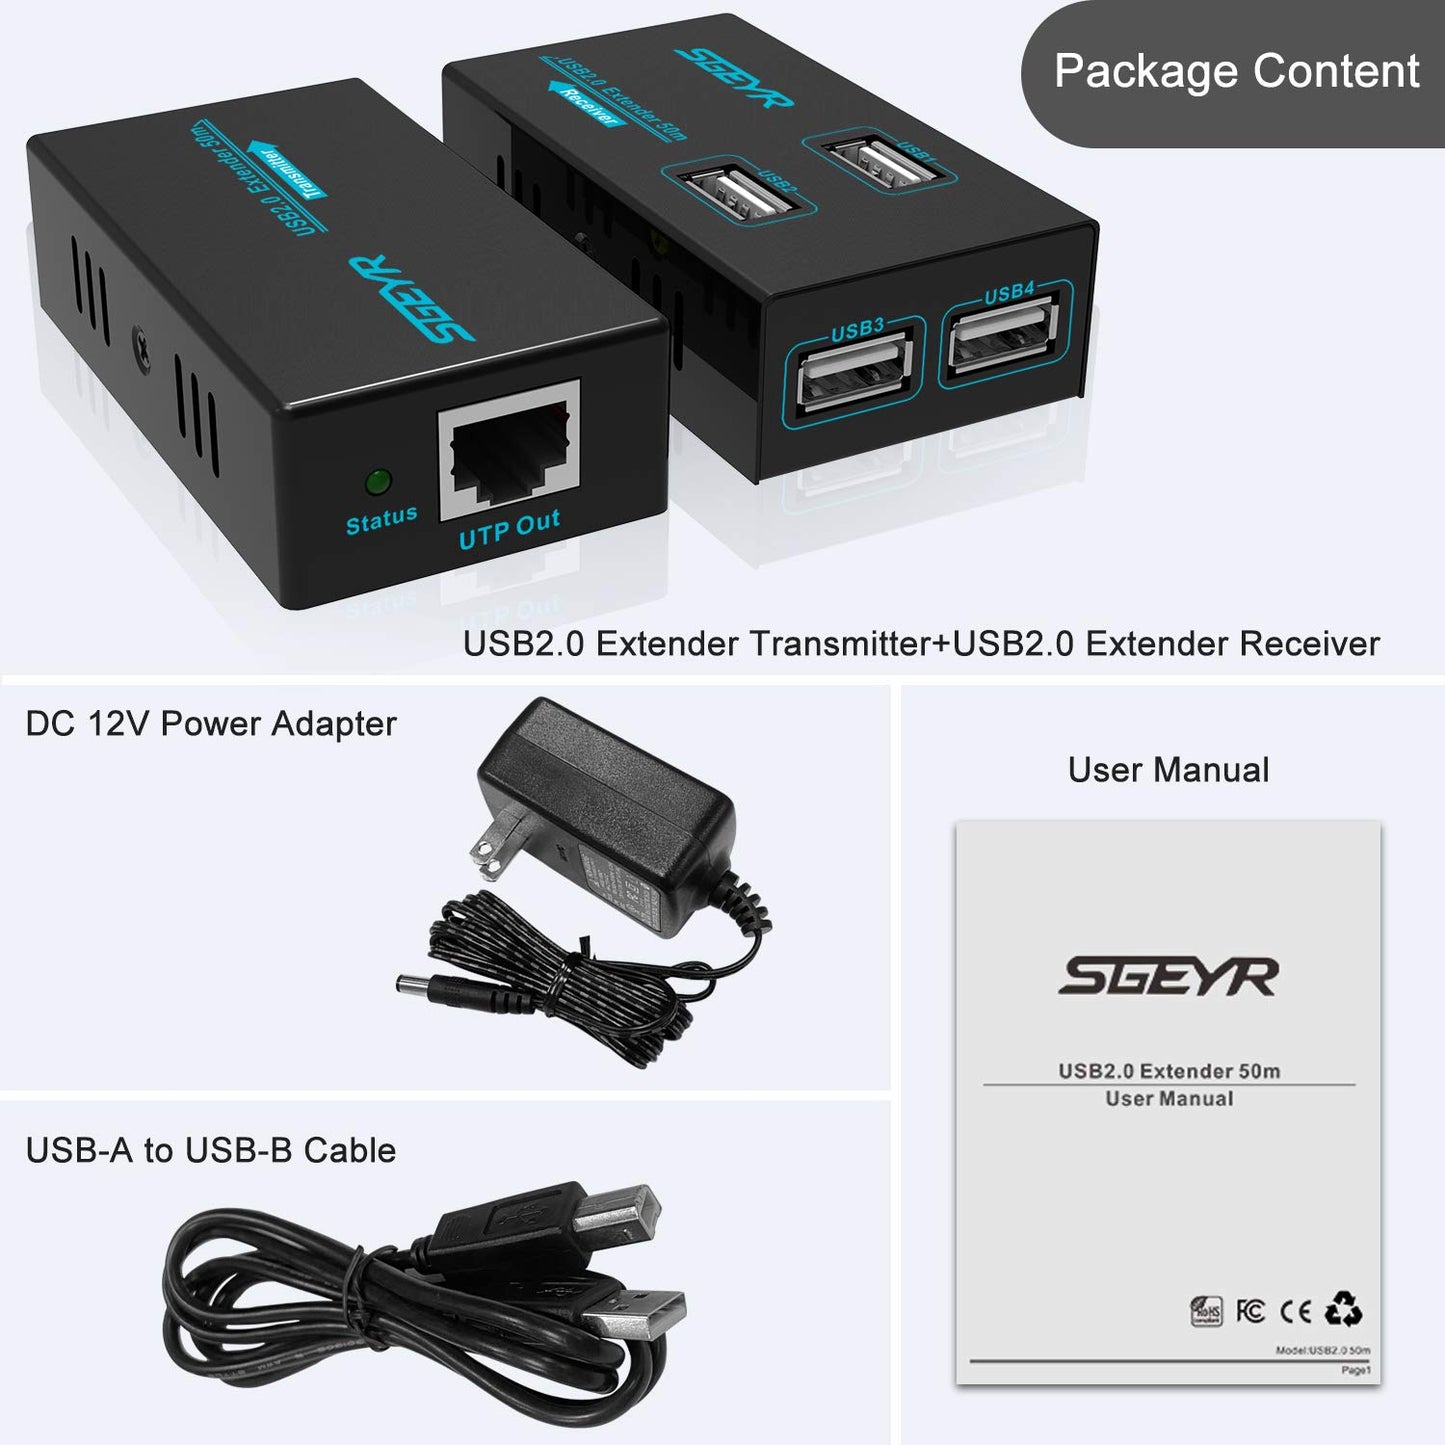 SGEYR Metal USB Ethernet Extender Over Cat5e/6,USB Extender 50M,No Drivers Connected 4 USB 2.0 Ports Over Cat5e/6, Play and Plug,Extender USB 2.0 Hub,Supports All Operating System,PC and Web Cameras